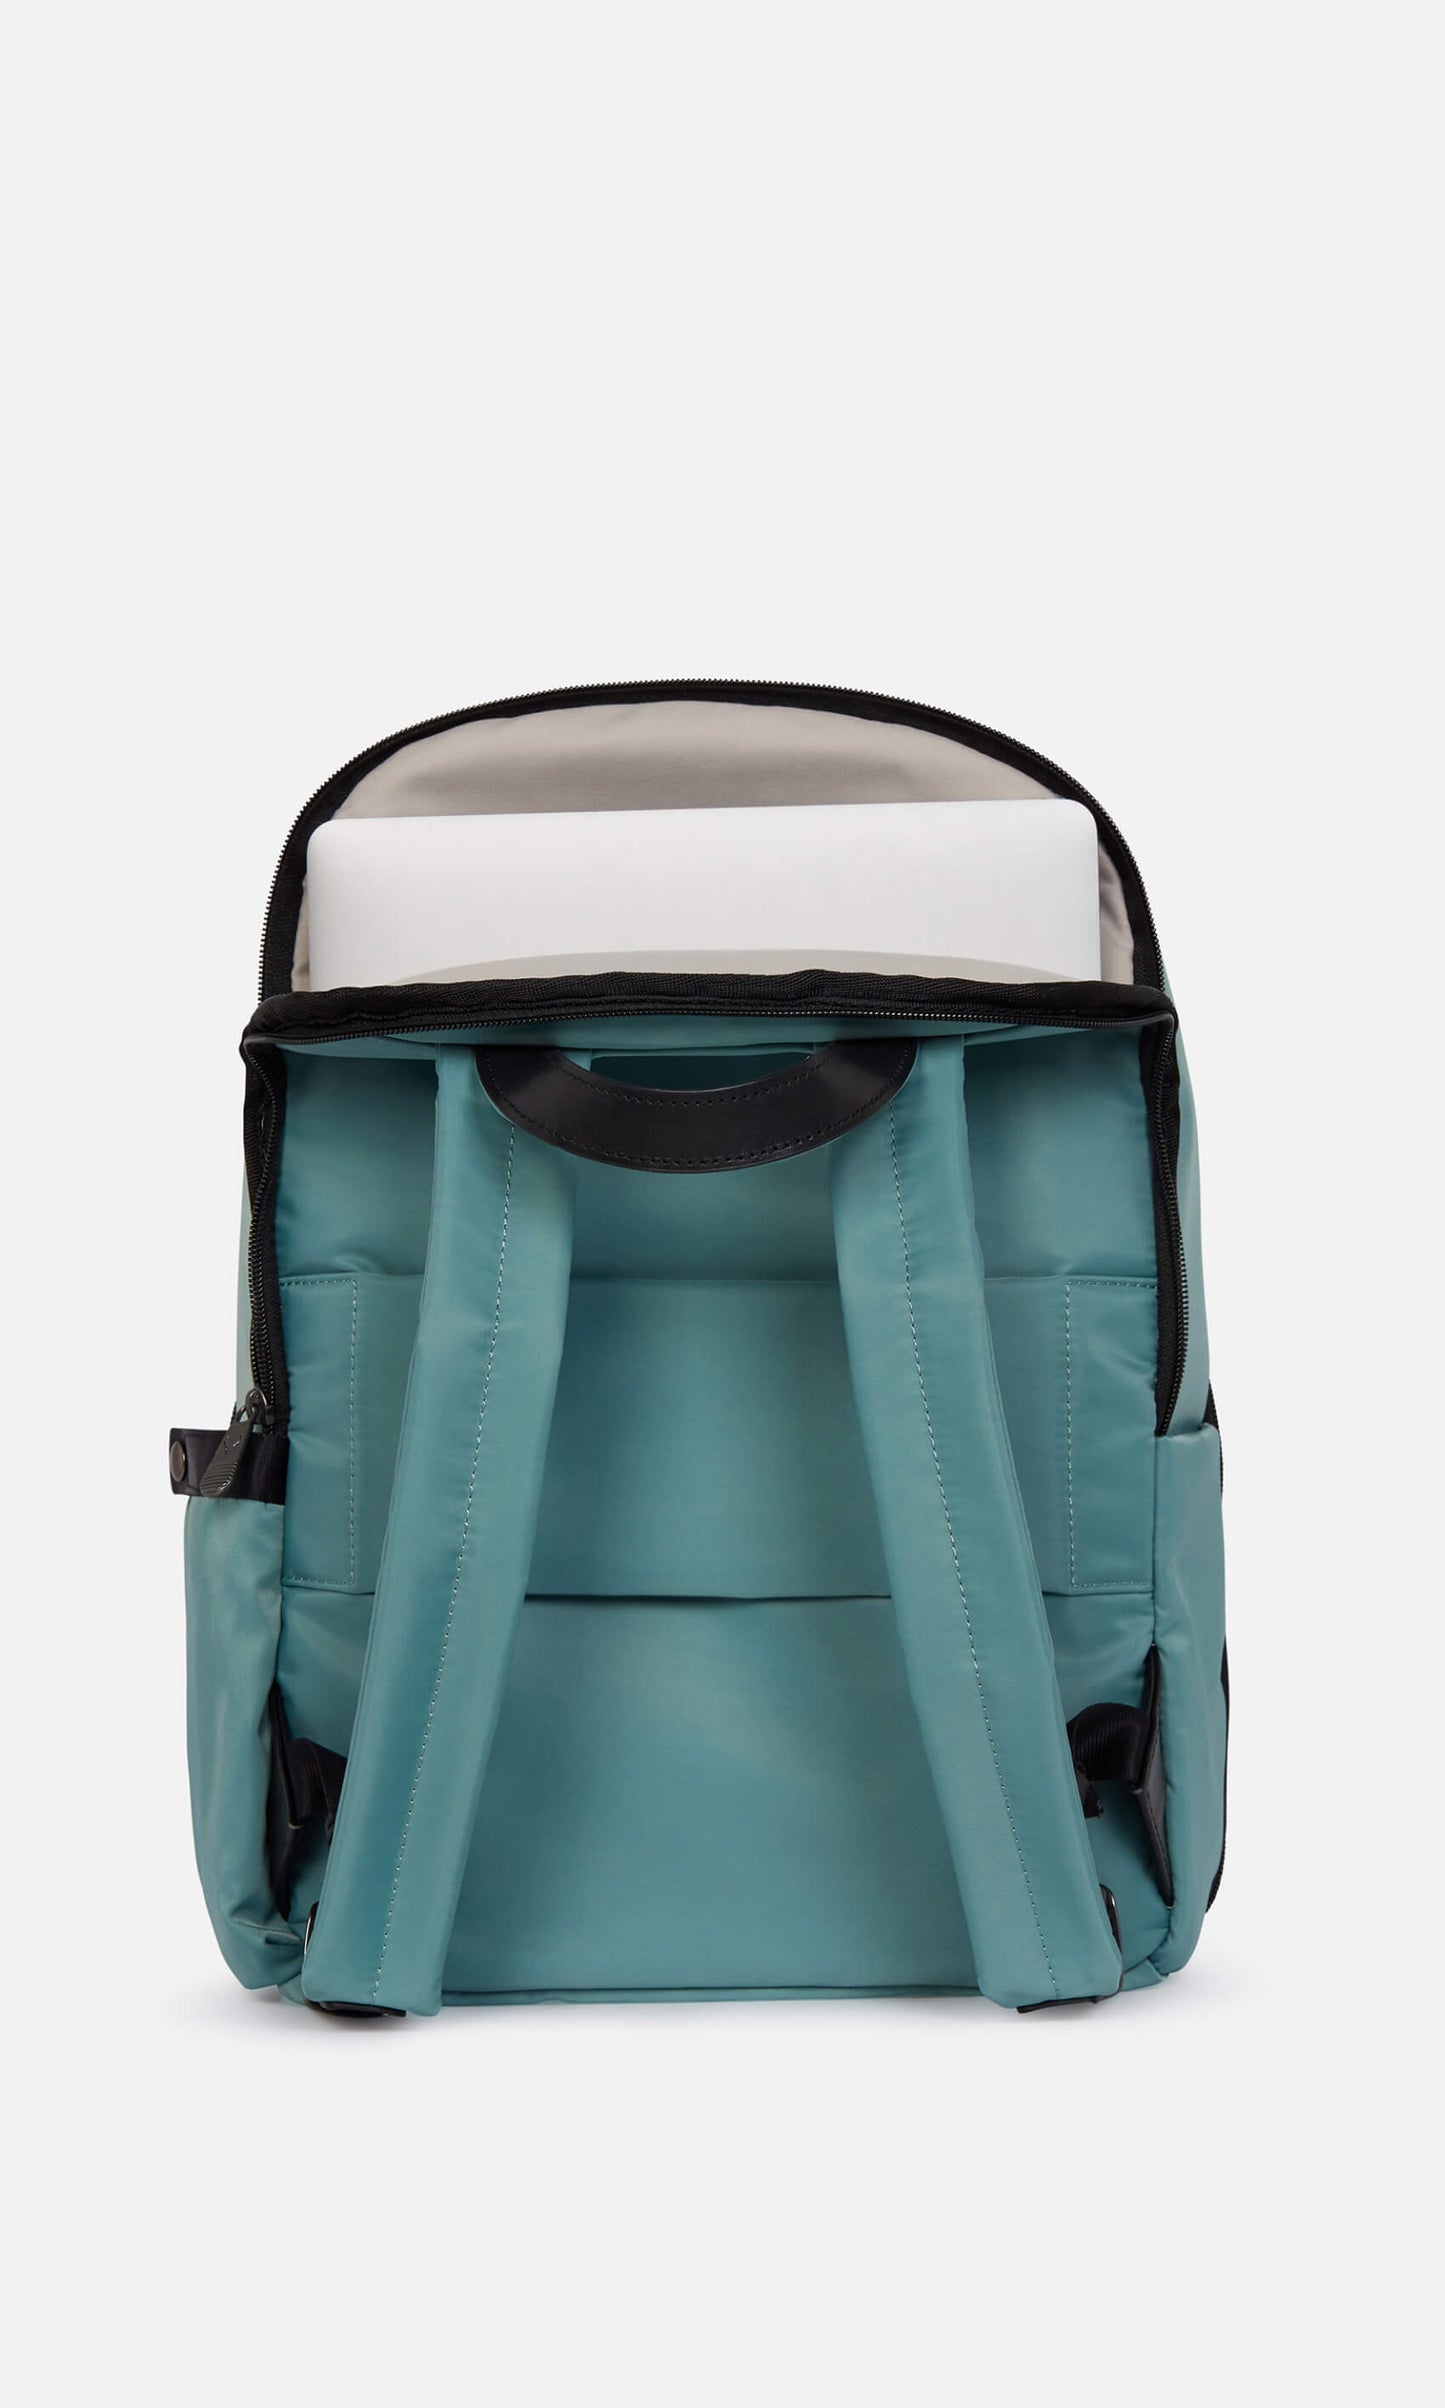 Chelsea backpack in mineral